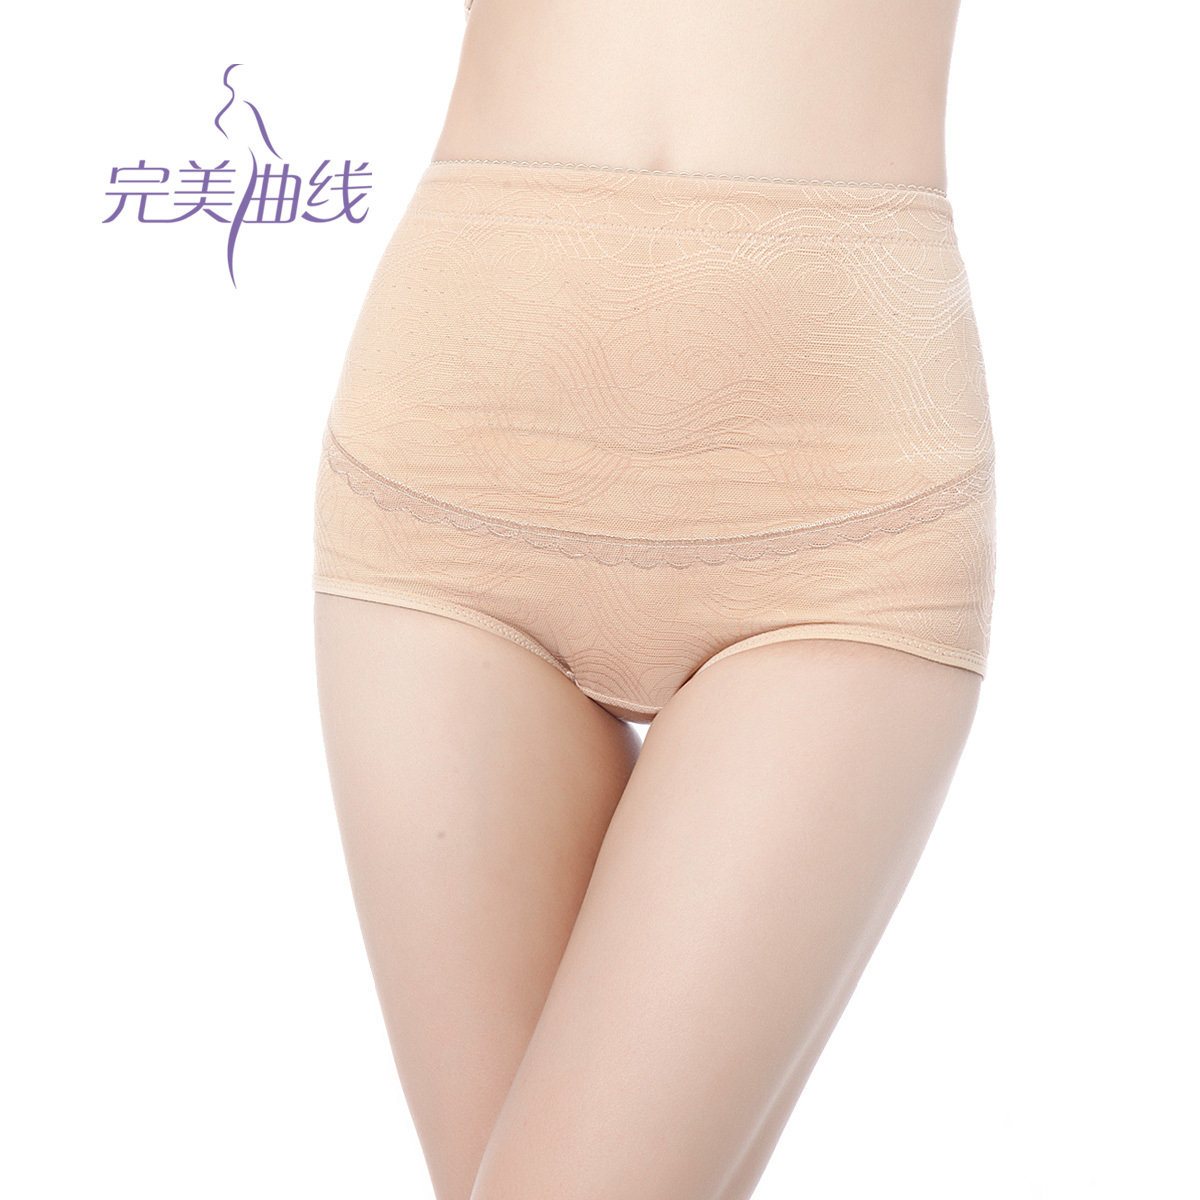 Perfect curve corset slimming pants body shaping panties puerperal abdomen drawing butt-lifting corselets seamless female 8362